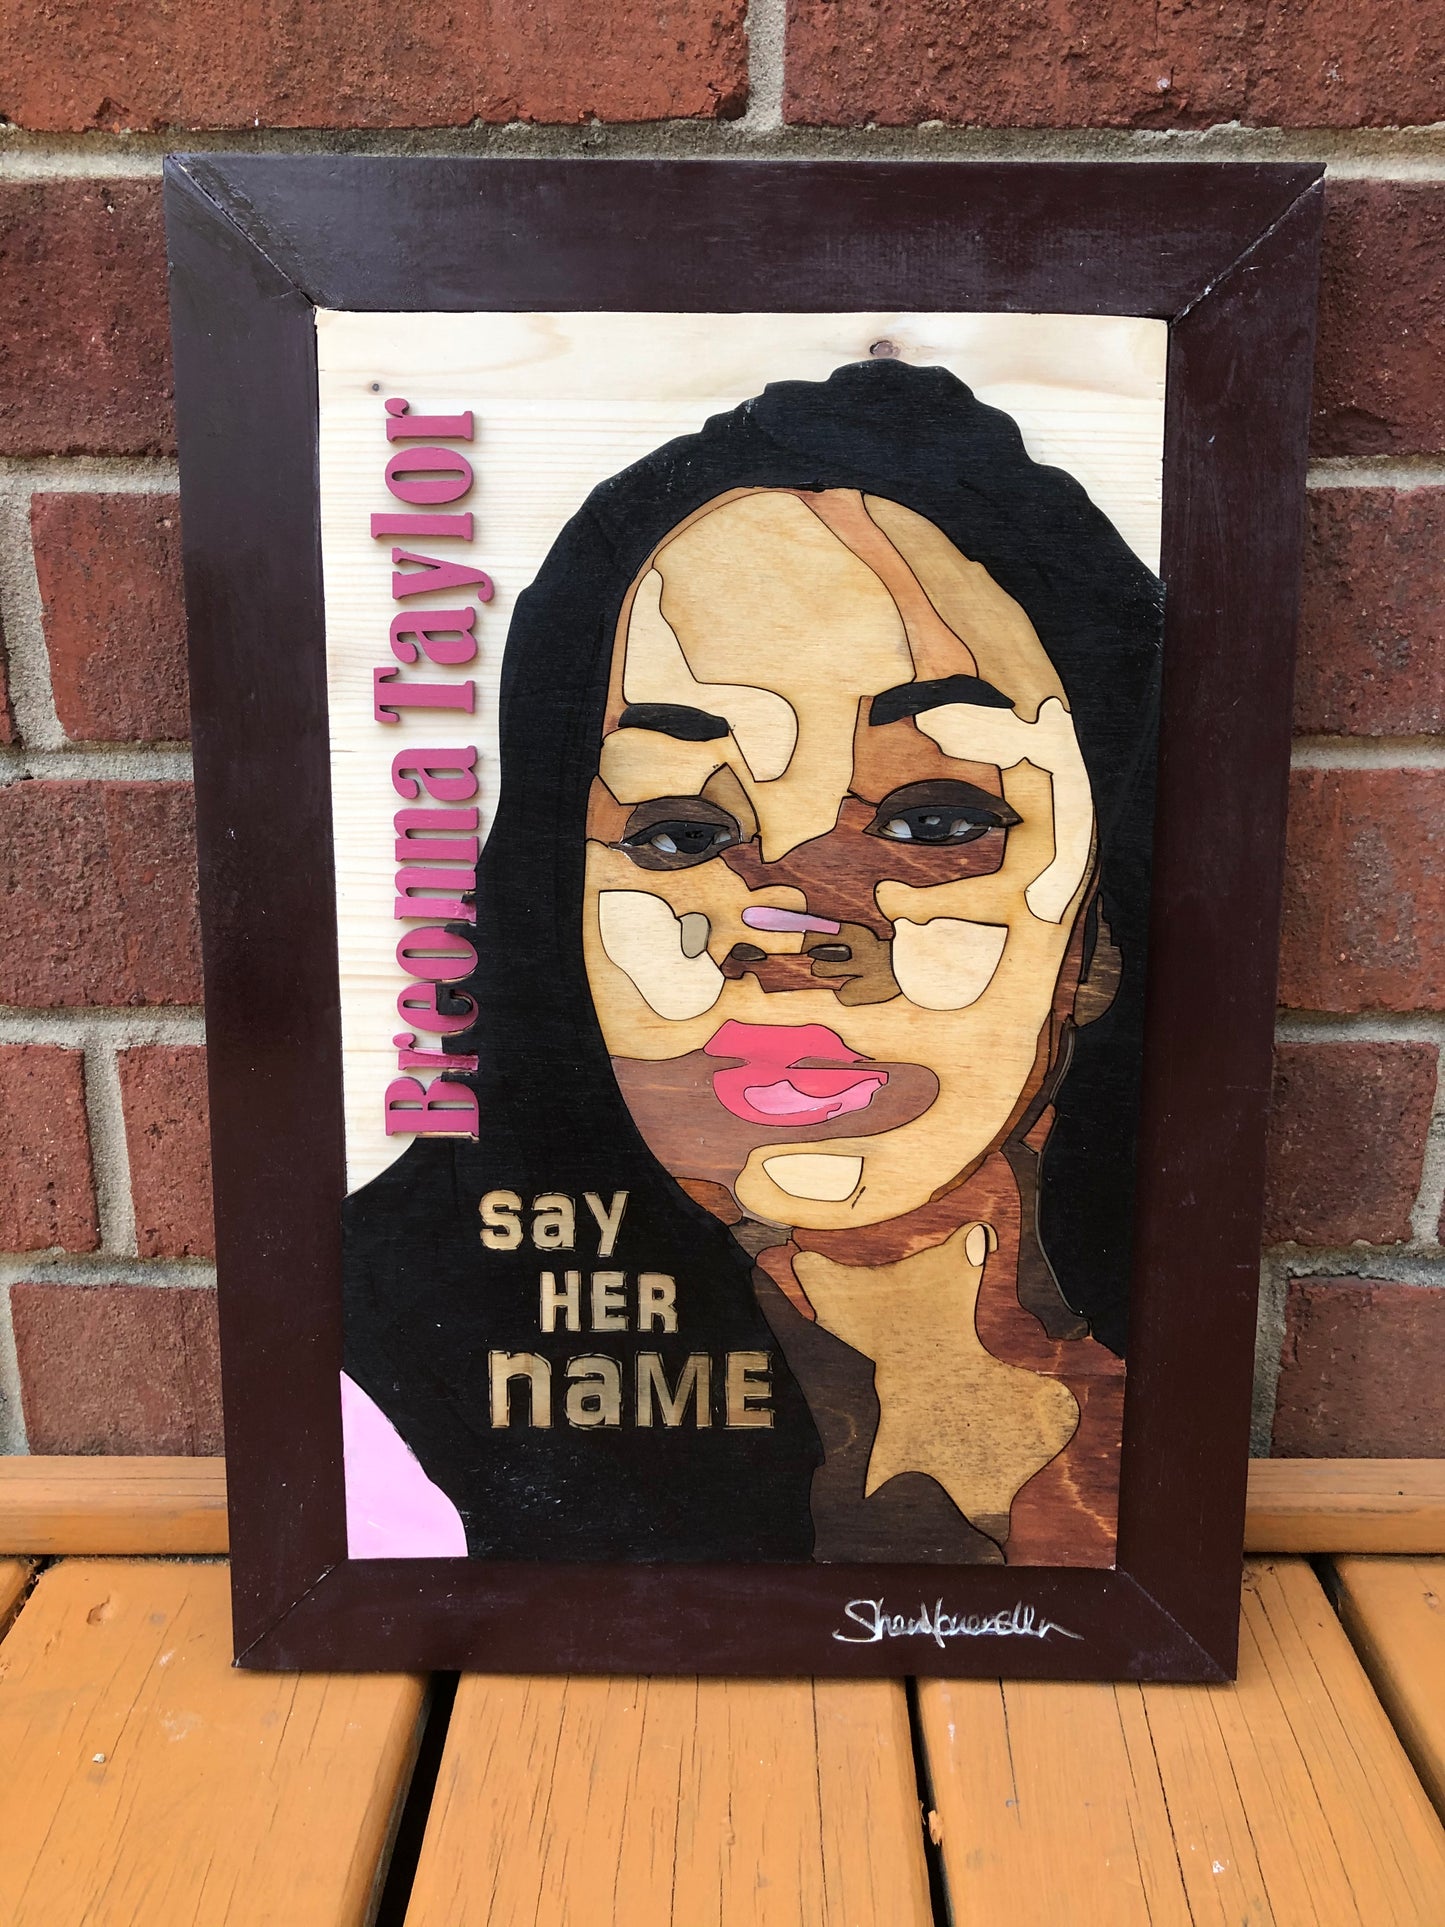 Woodcut of Breonna Taylor with a woodcut printed of her name along with engraved, "Say Her Name"